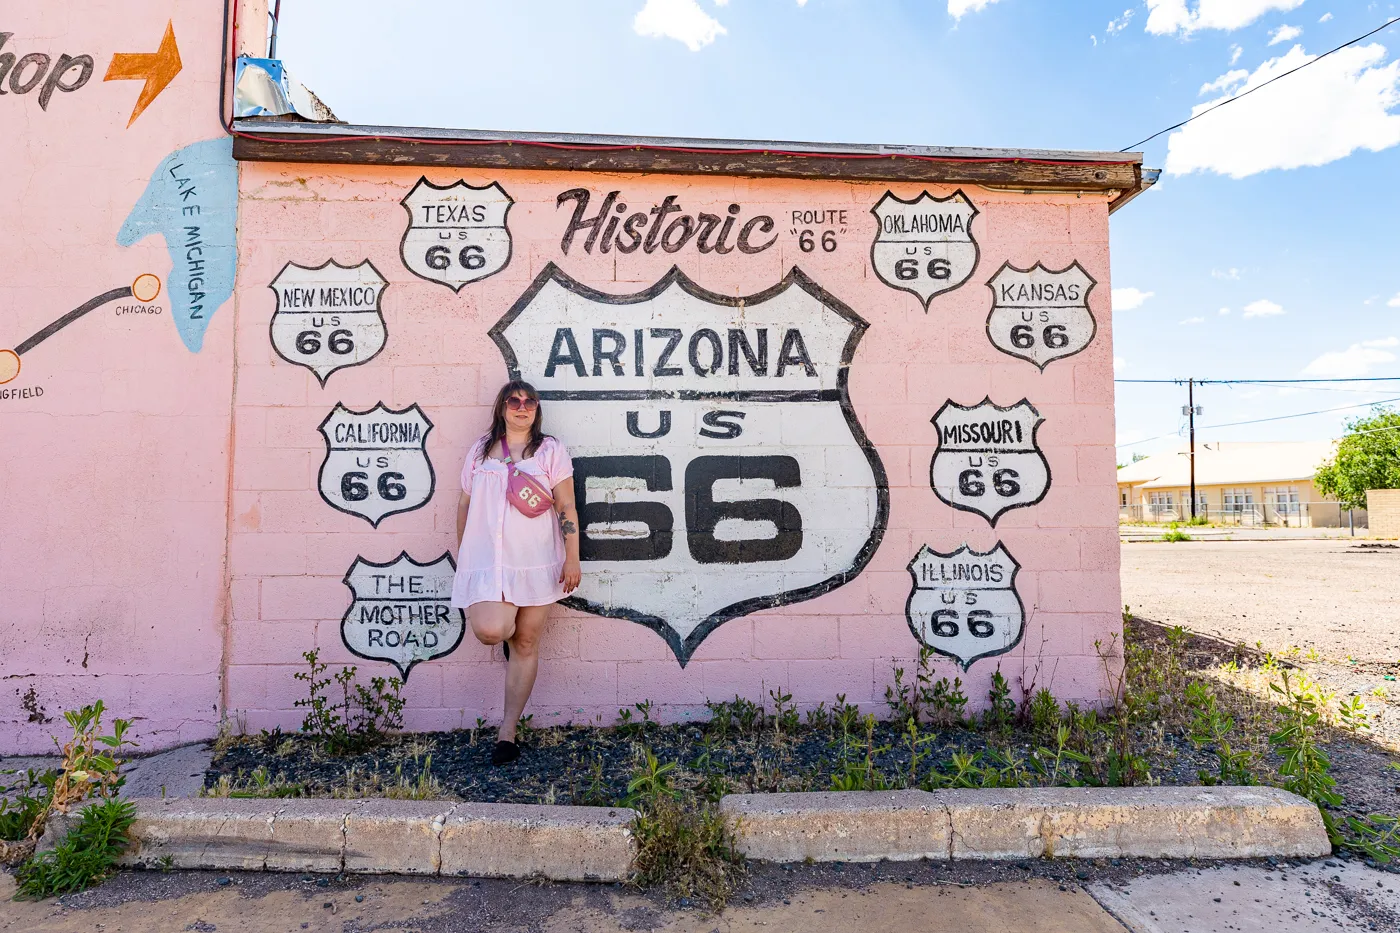 Joe & Aggie's Cafe: Pink Route 66 Mural in Holbrook, Arizona